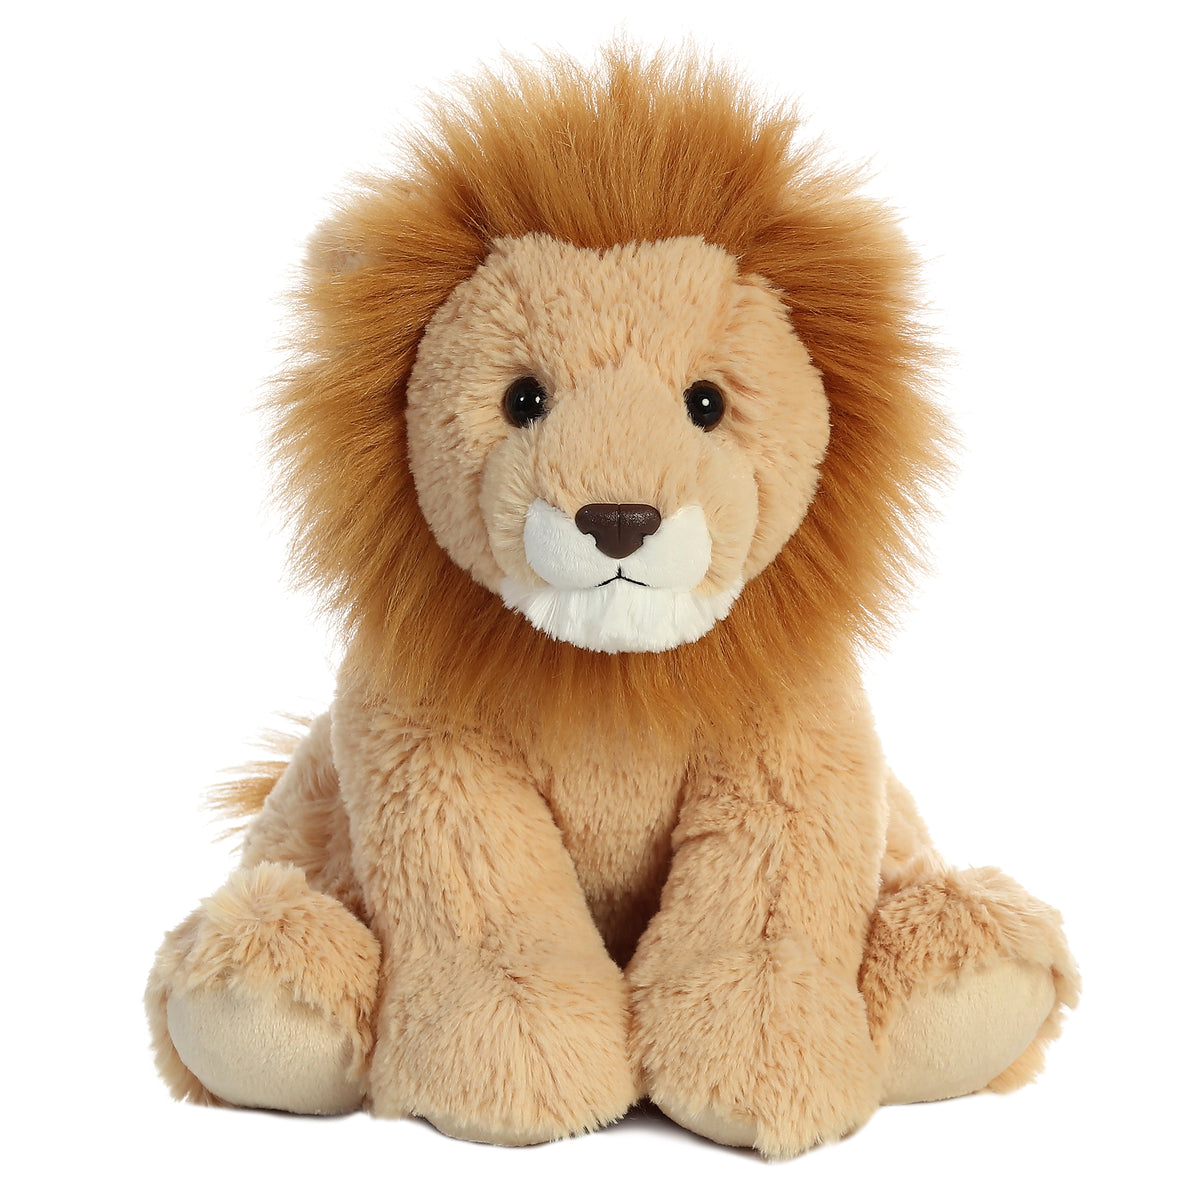 Aurora stuffed animals Regal Lion Plush with a full mane, kind expression, and rich tawny coat.